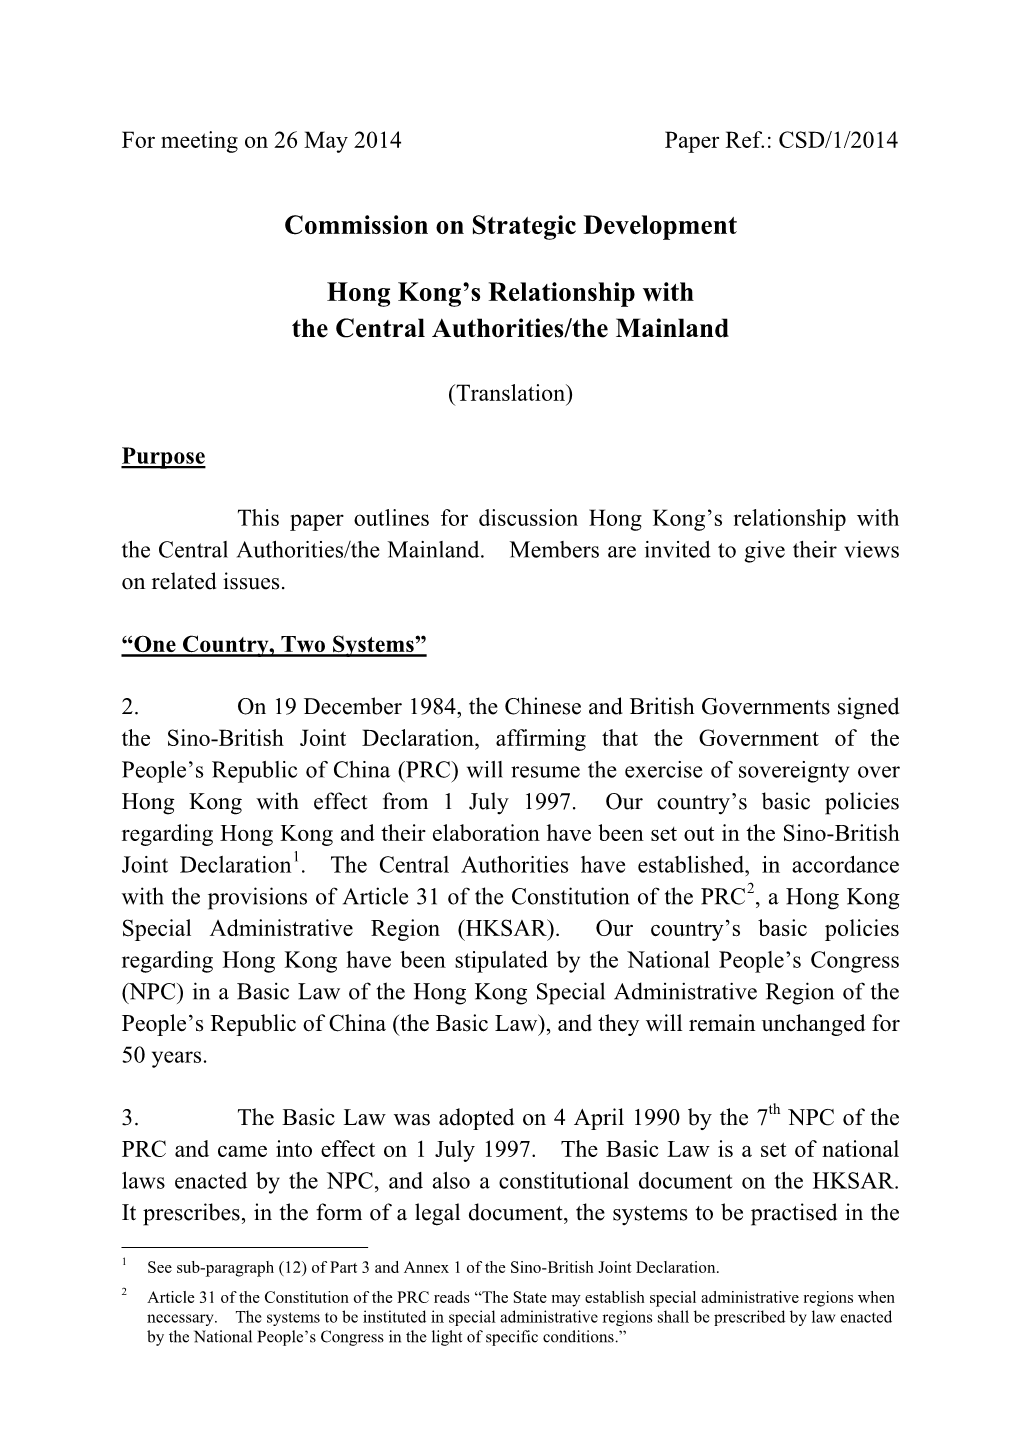 Hong Kong's Relationship with the Central Authorities/The Mainland